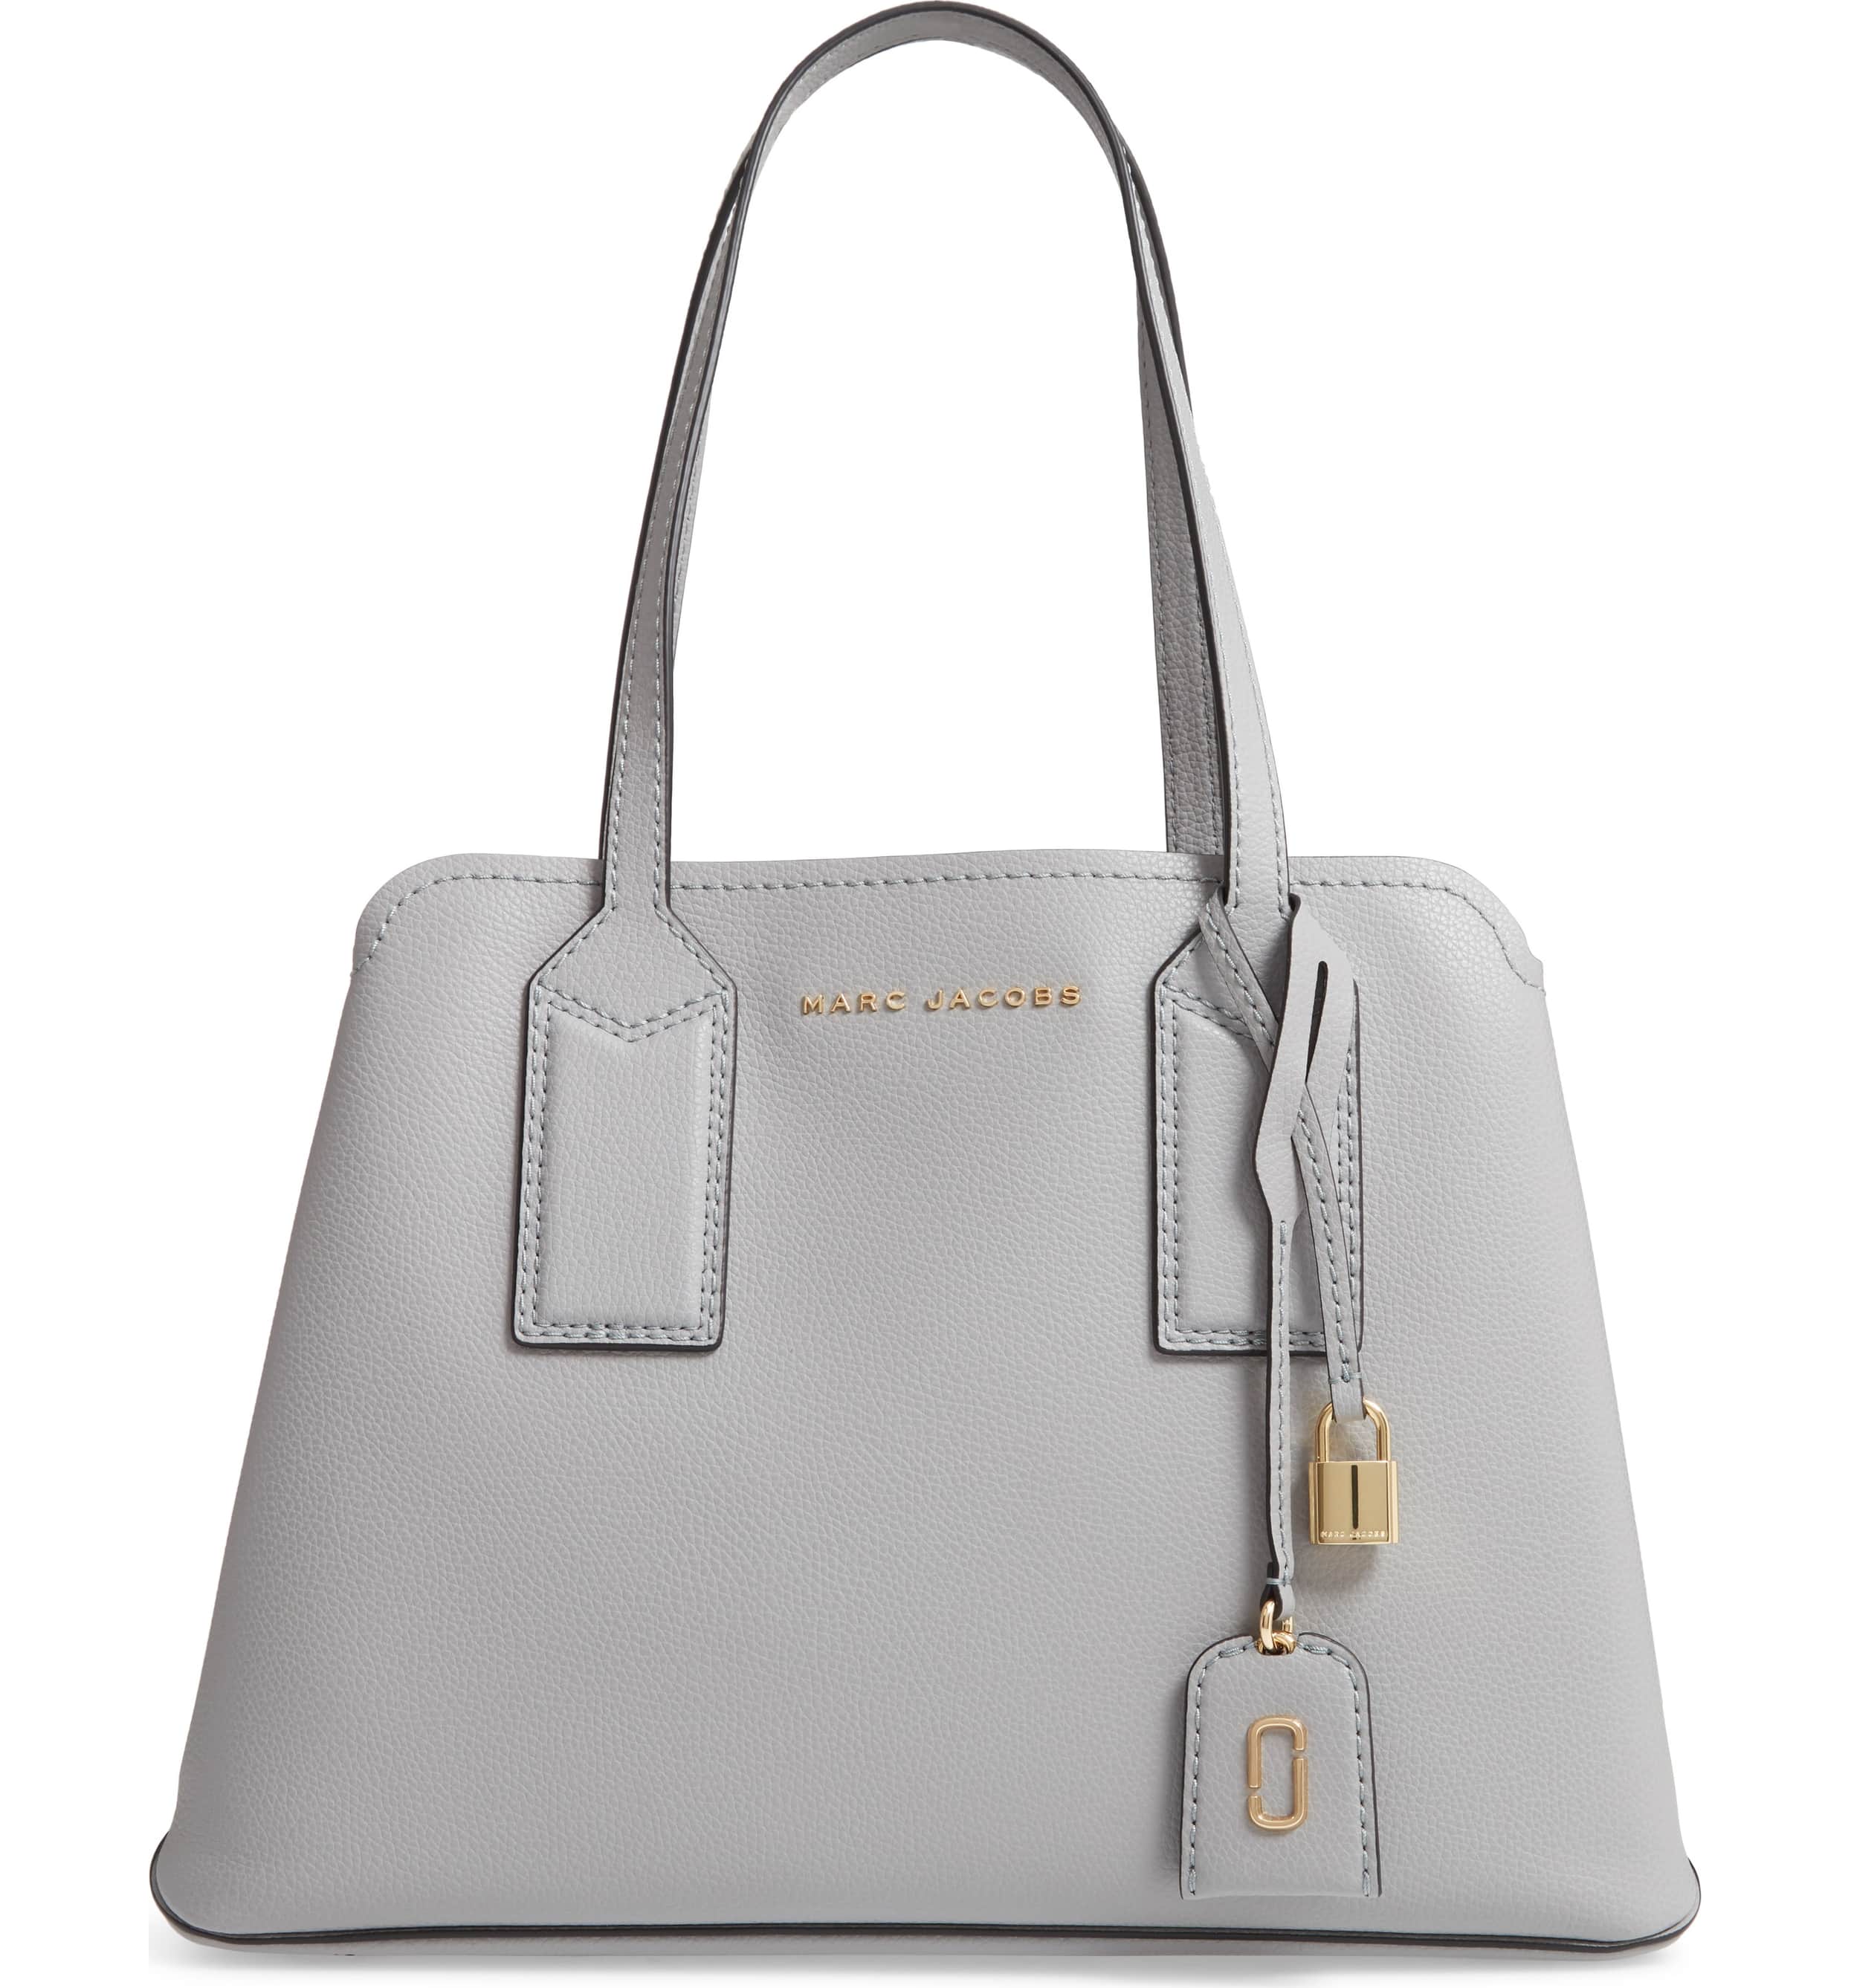 Black Friday Deal This Sleek Marc Jacobs Tote Bag is 40 Percent Off